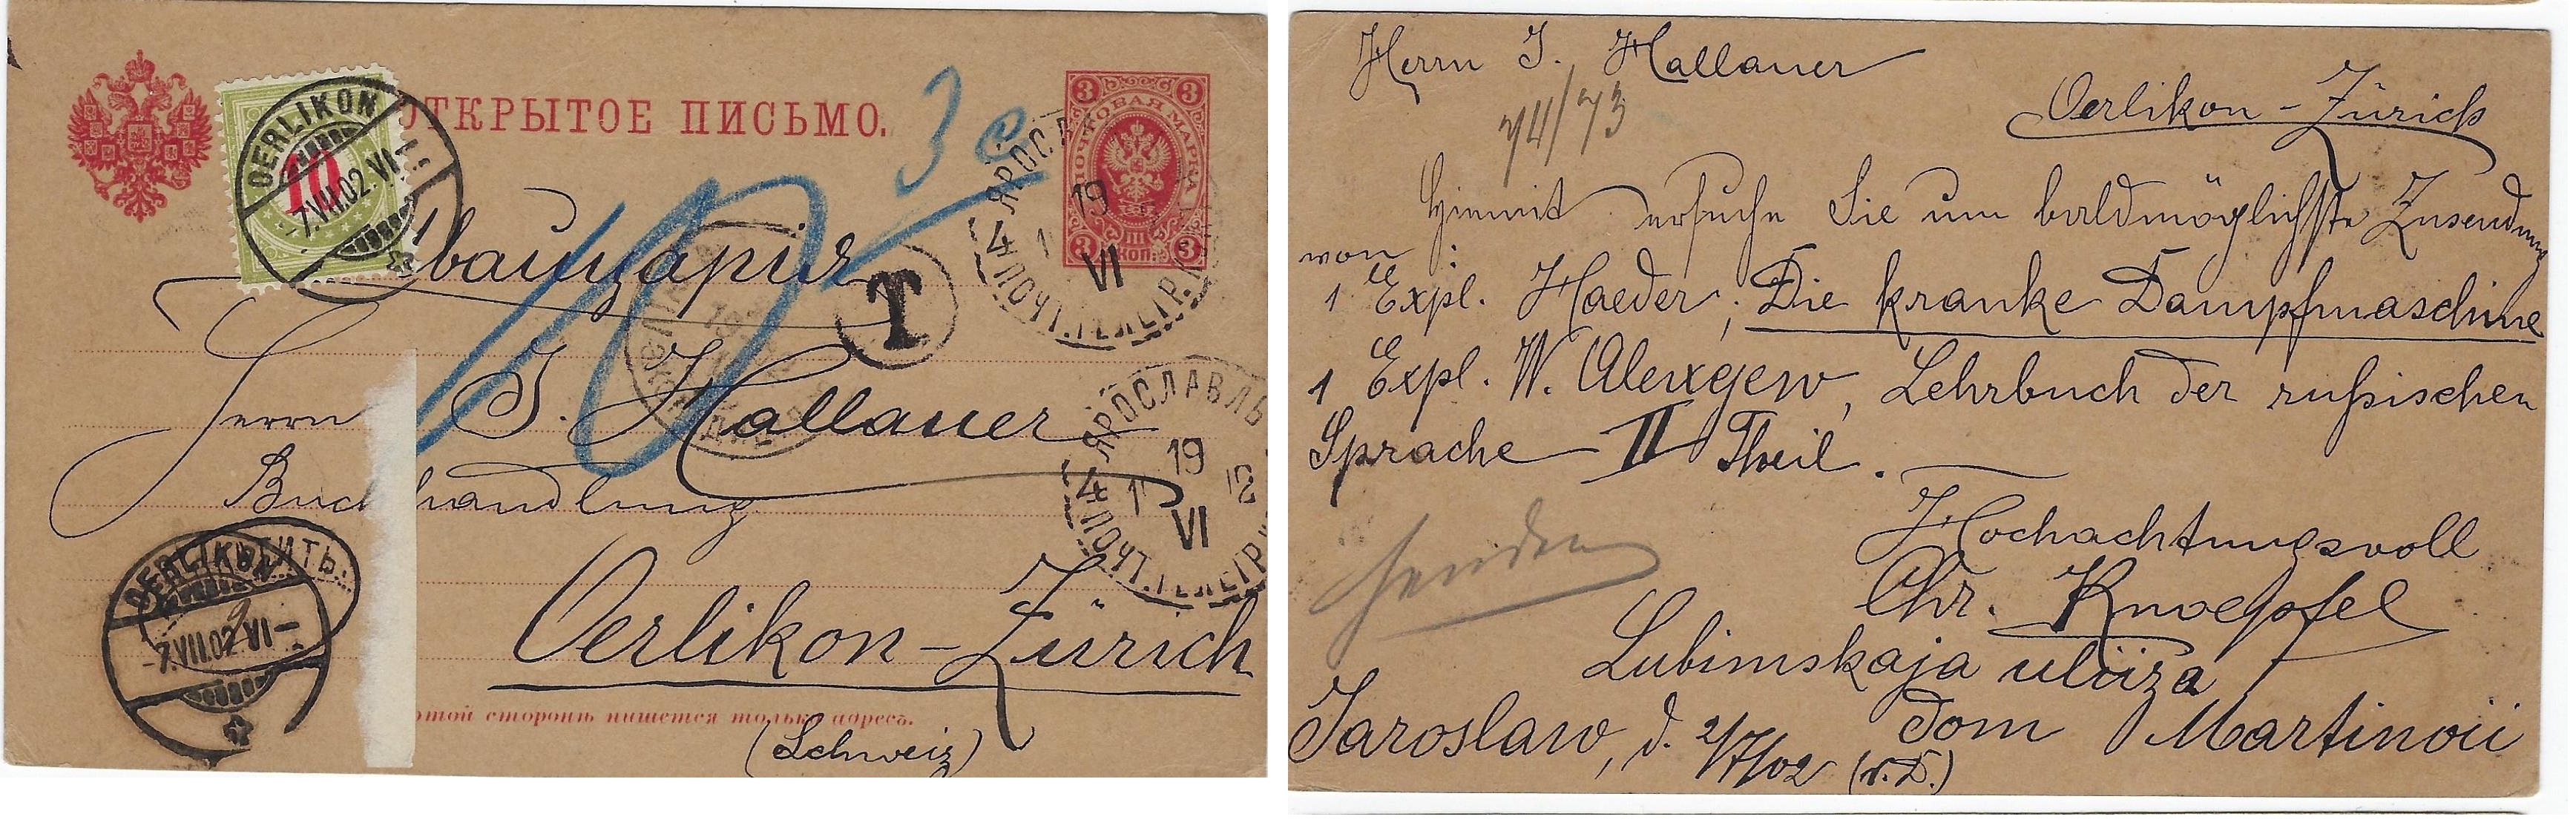 Russia Postal History - Postmarks Postage due Scott 5a1912 